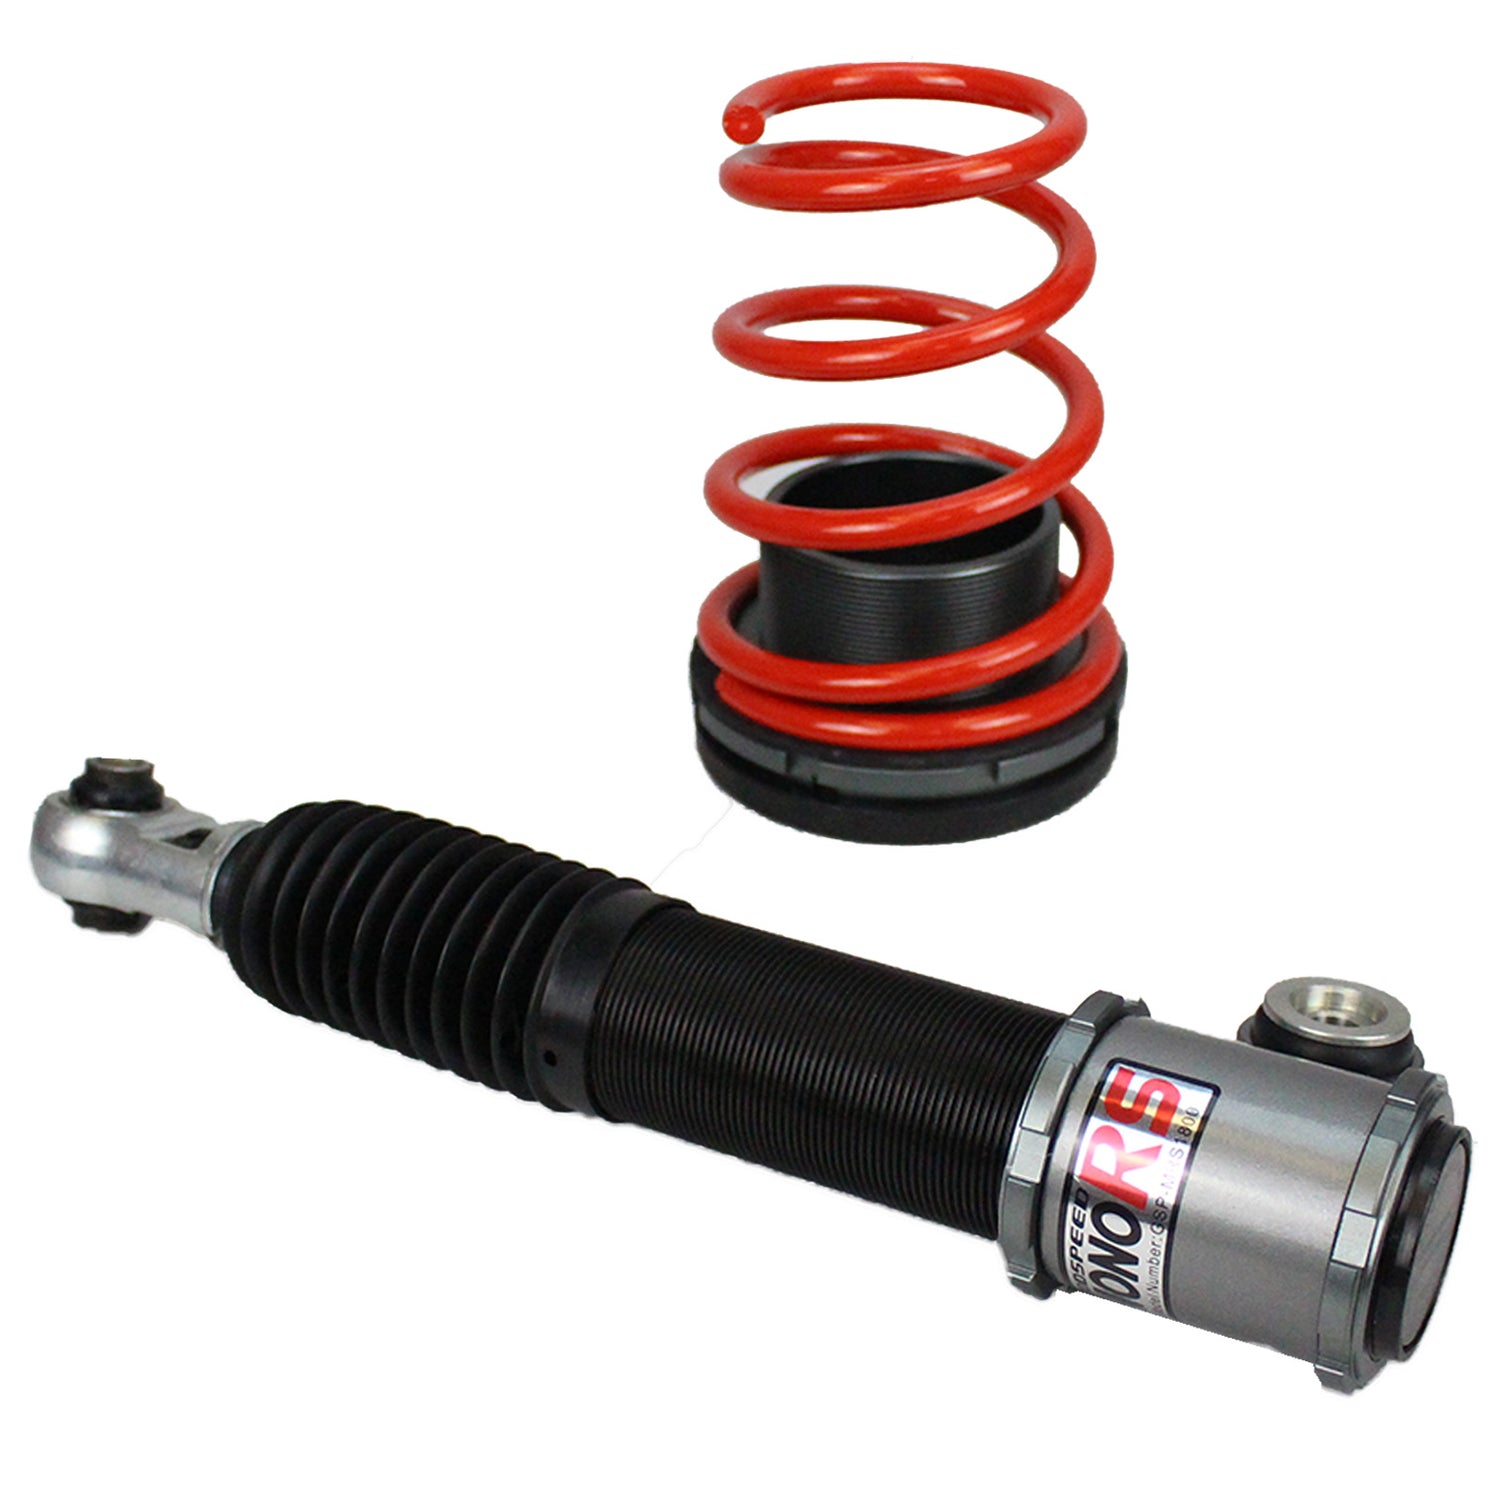 Godspeed MRS1800-B MonoRS Coilover Lowering Kit, 32 Damping Adjustment, Ride Height Adjustable